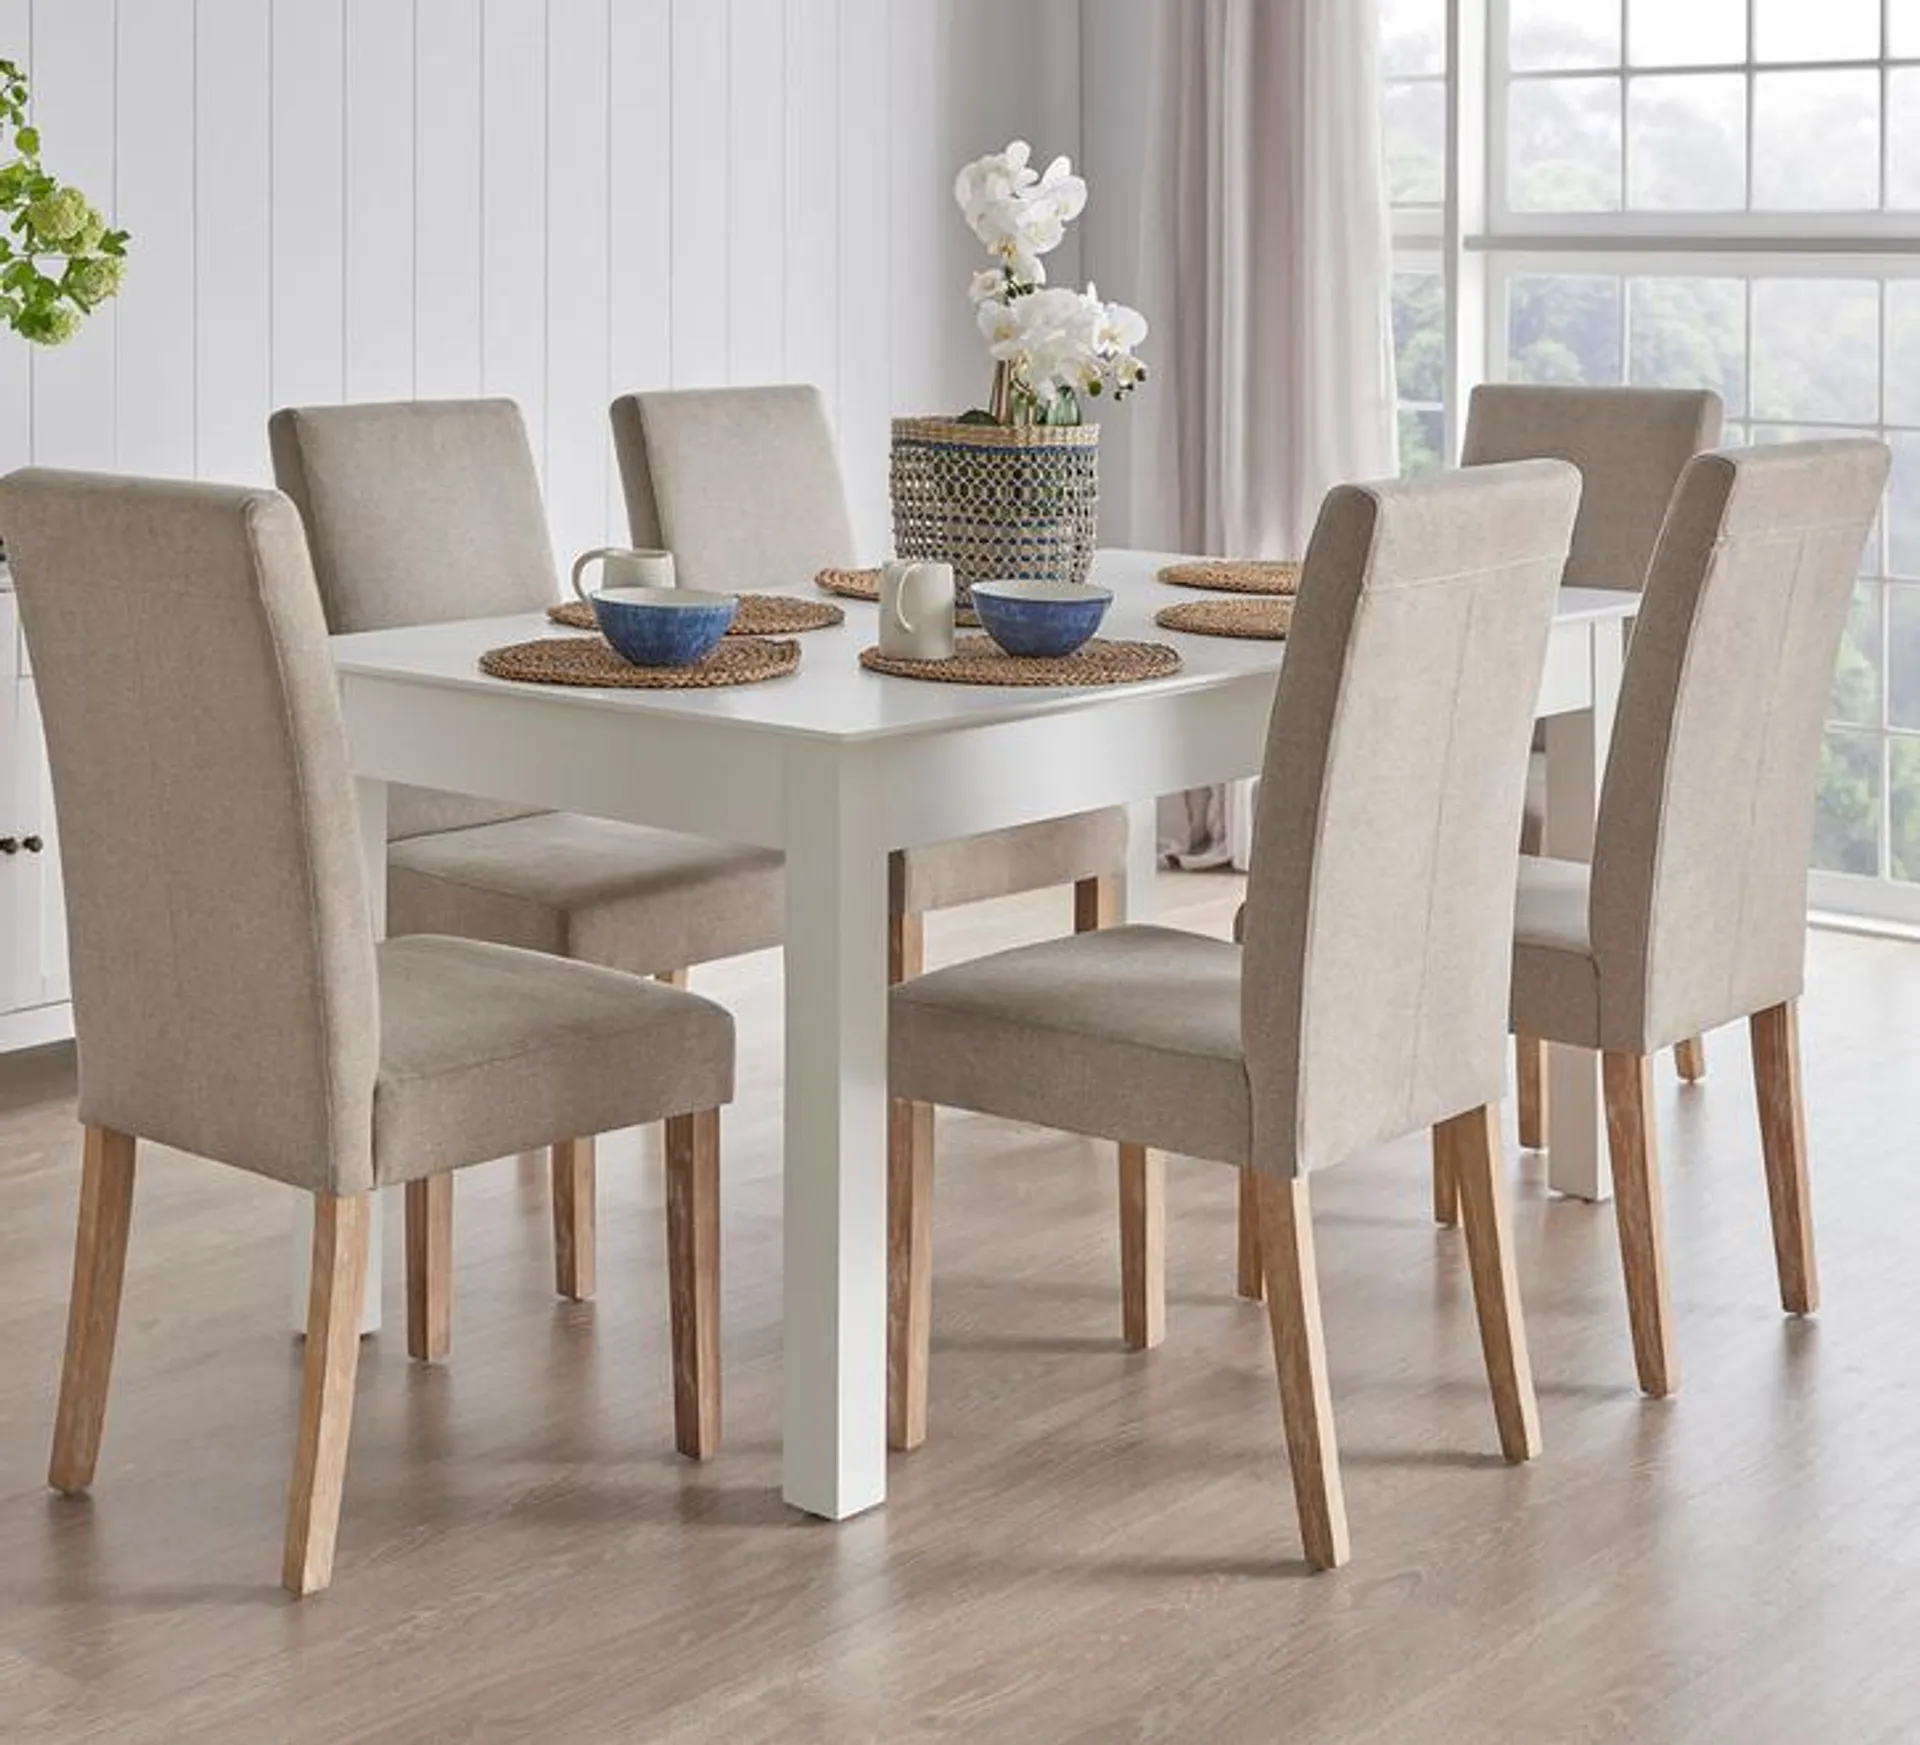 Hamilton 6 Seater Dining Set With Avenue Chairs